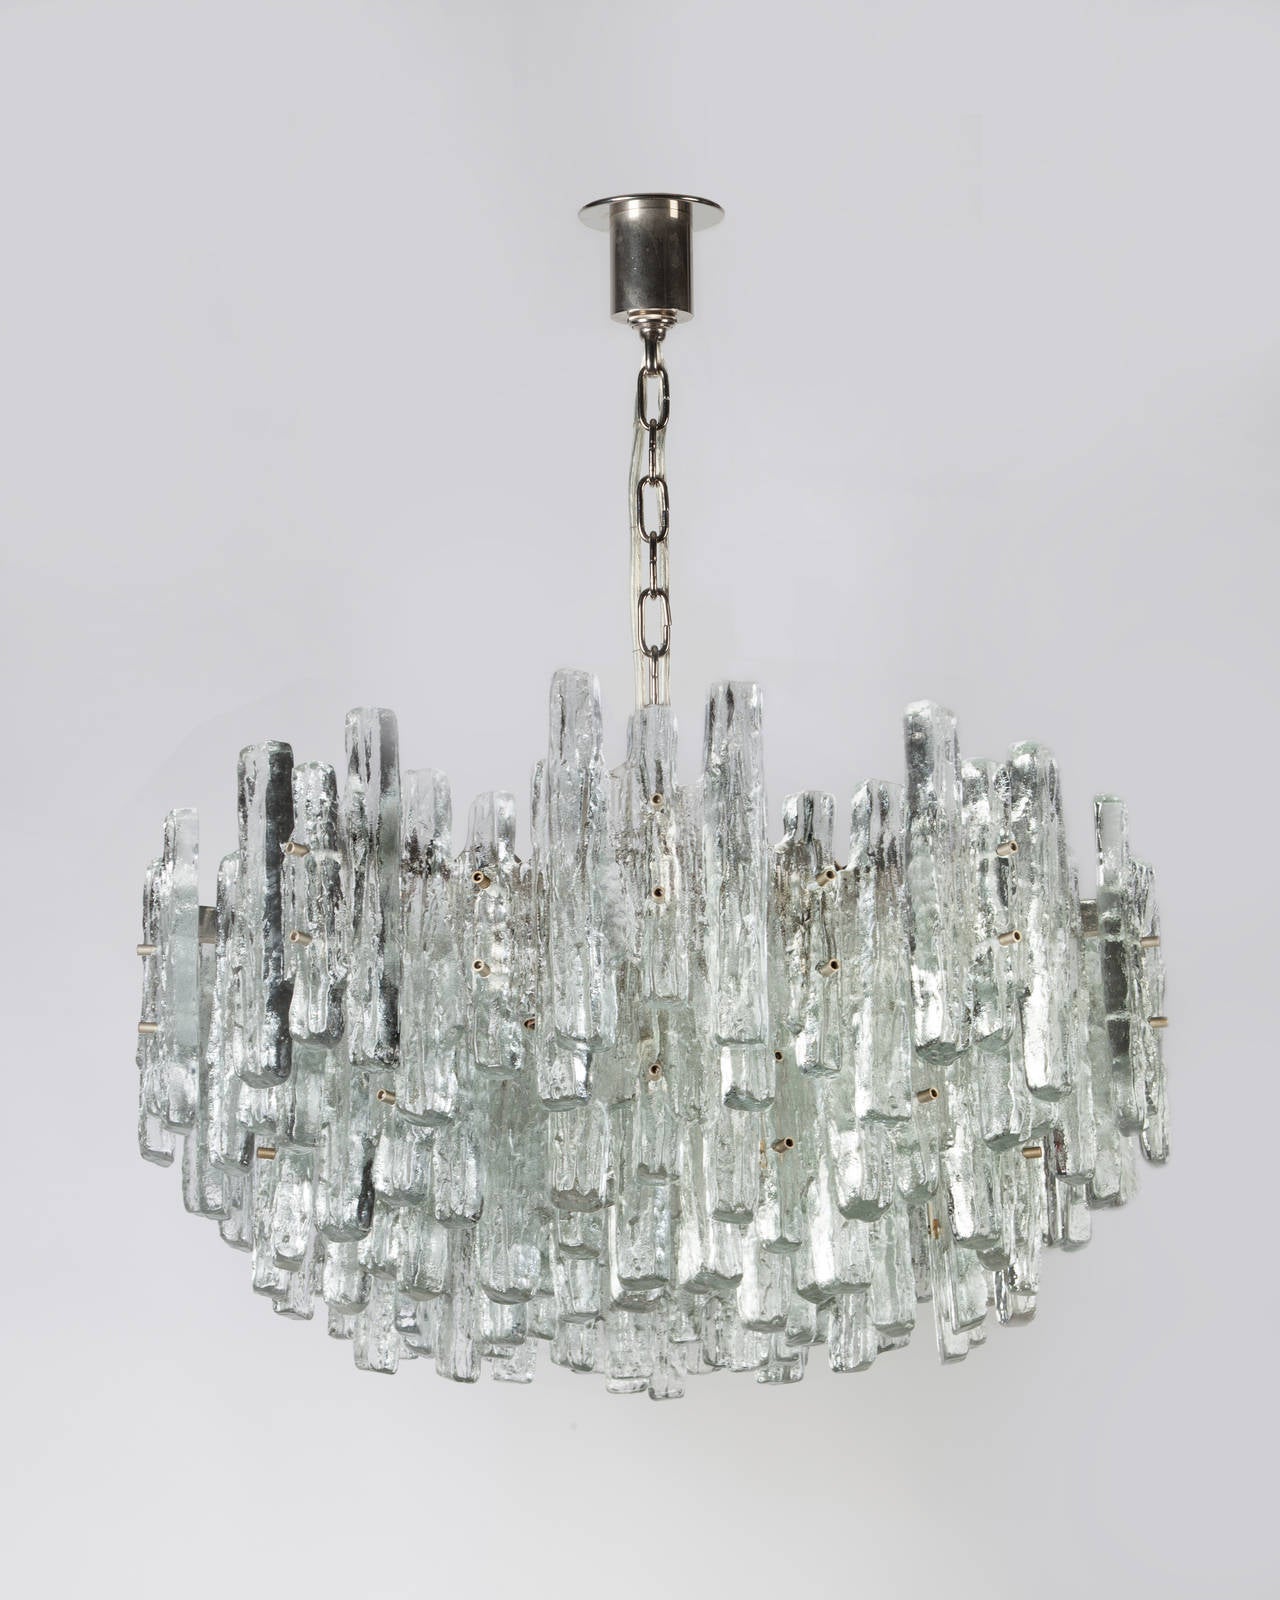 AHL3868

Circa 1970
A large thirty-light vintage chandelier with a nickel frame dressed with textured cast glass ice style prisms. By the Austrian maker Kalmar. Due to the antique nature of this fixture, there may be some nicks or imperfections